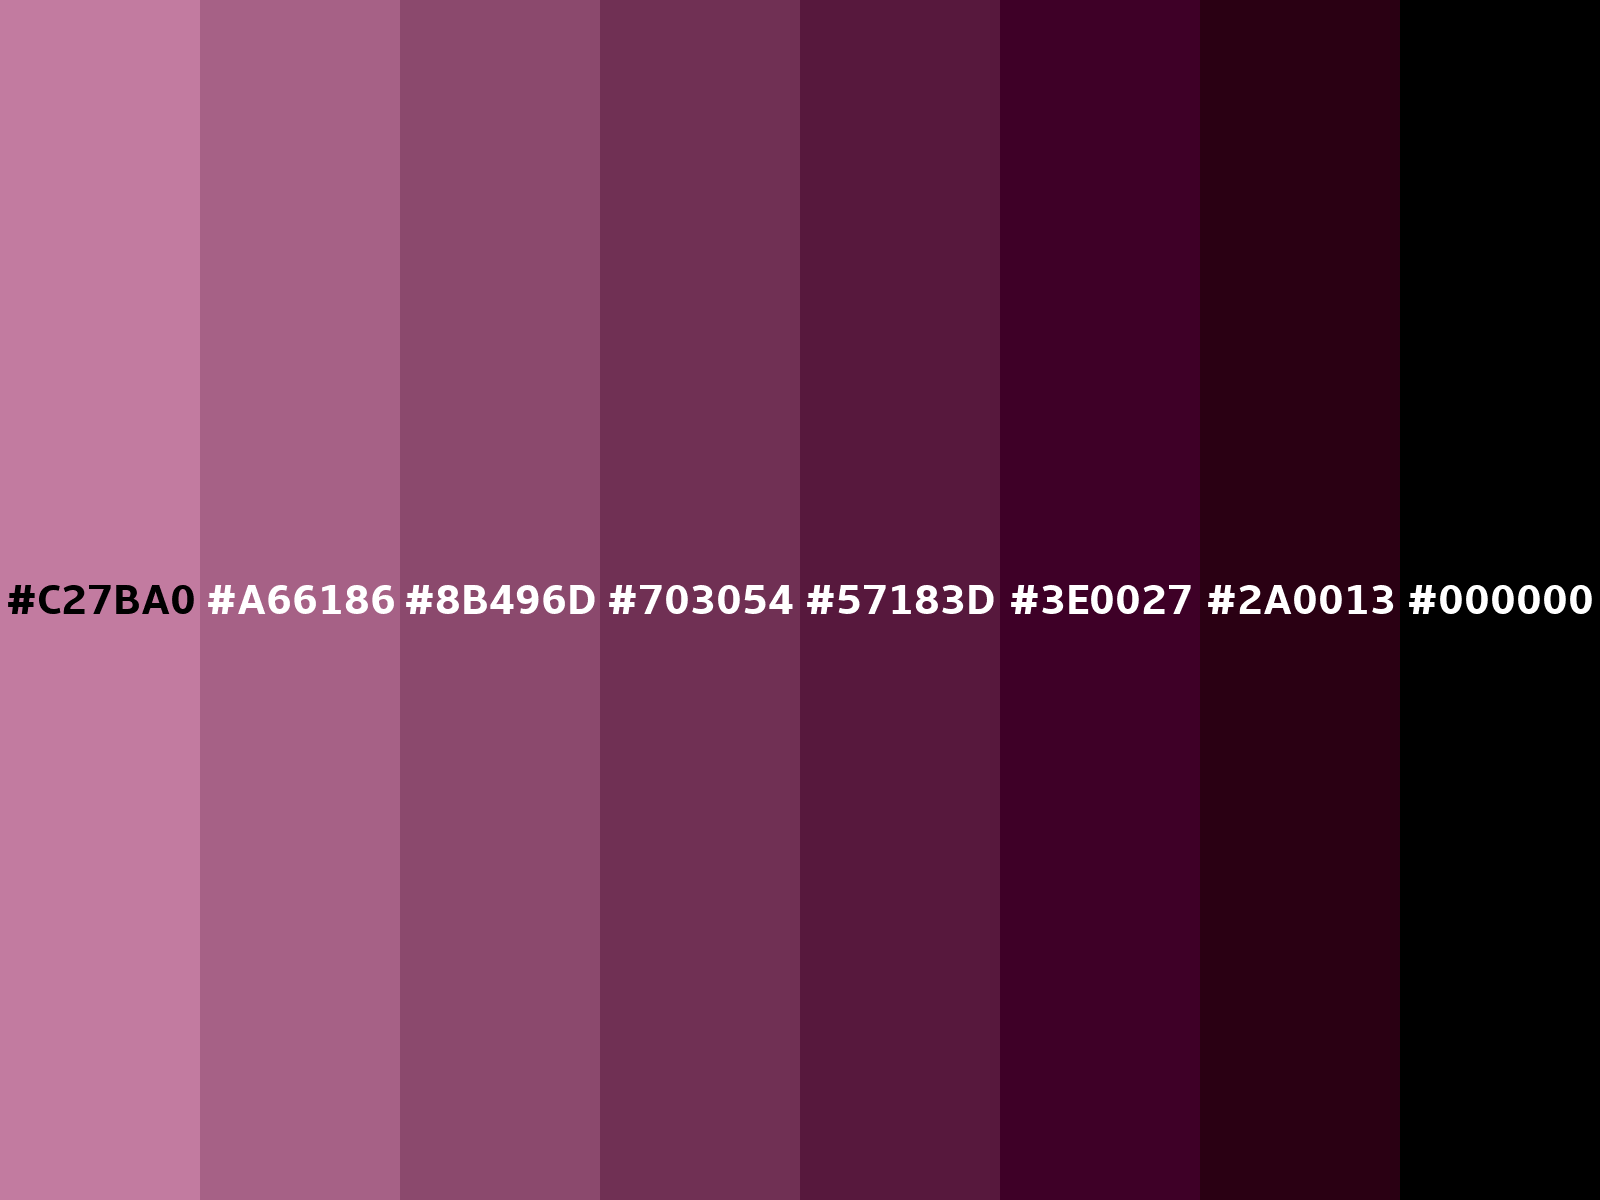 Tollens Tourbe blonde - #a49189 color code hexadecimal - T2153-2